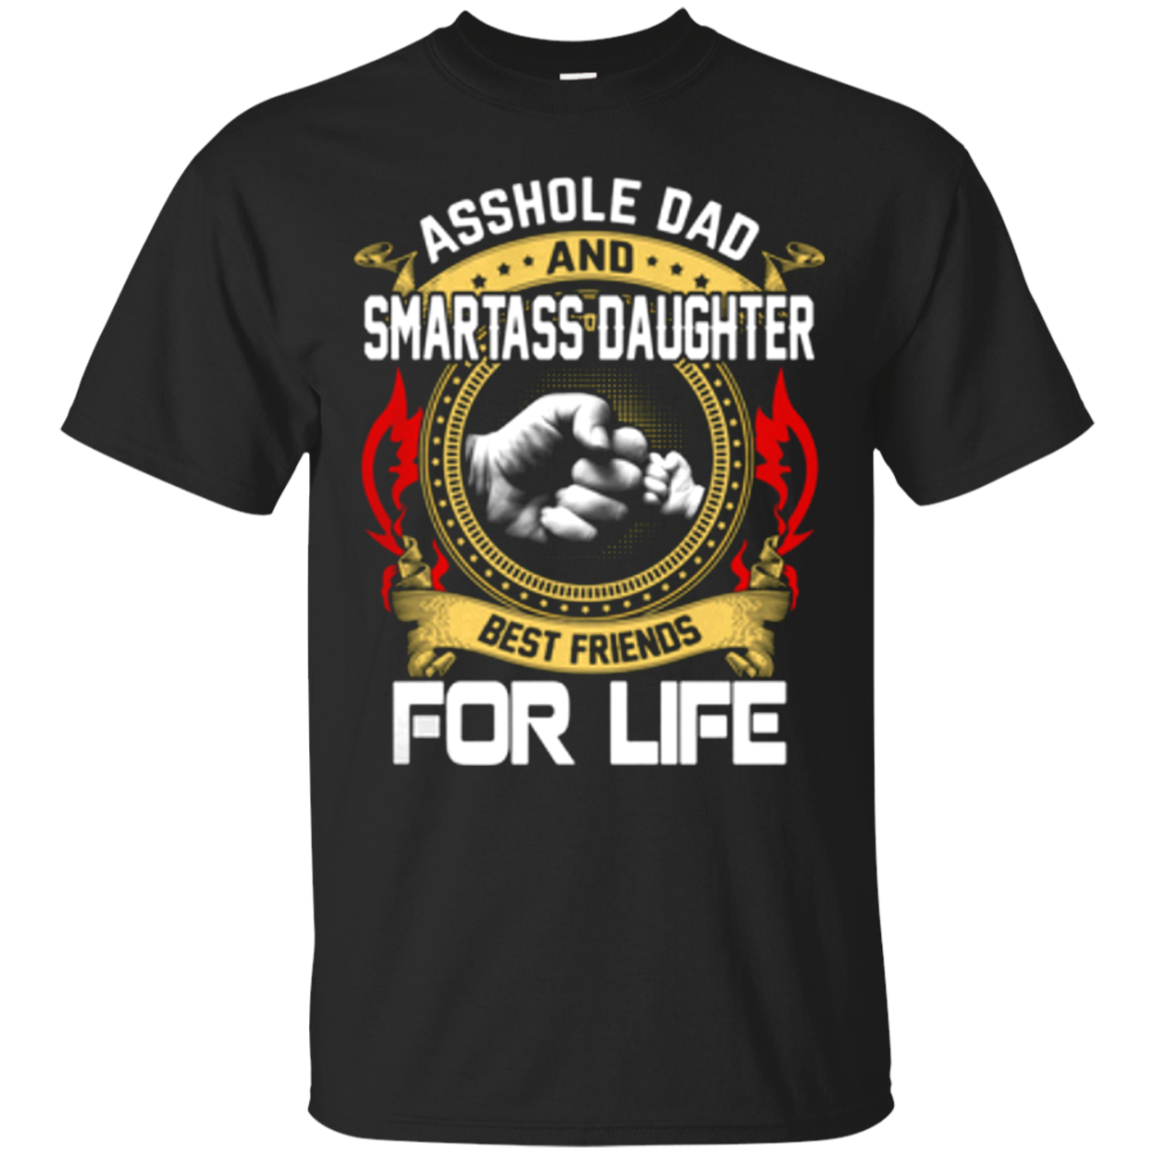 Asshole Dad And Smartass Daughter Best Friends For Life T Shirt Hoodie Sweater Amyna